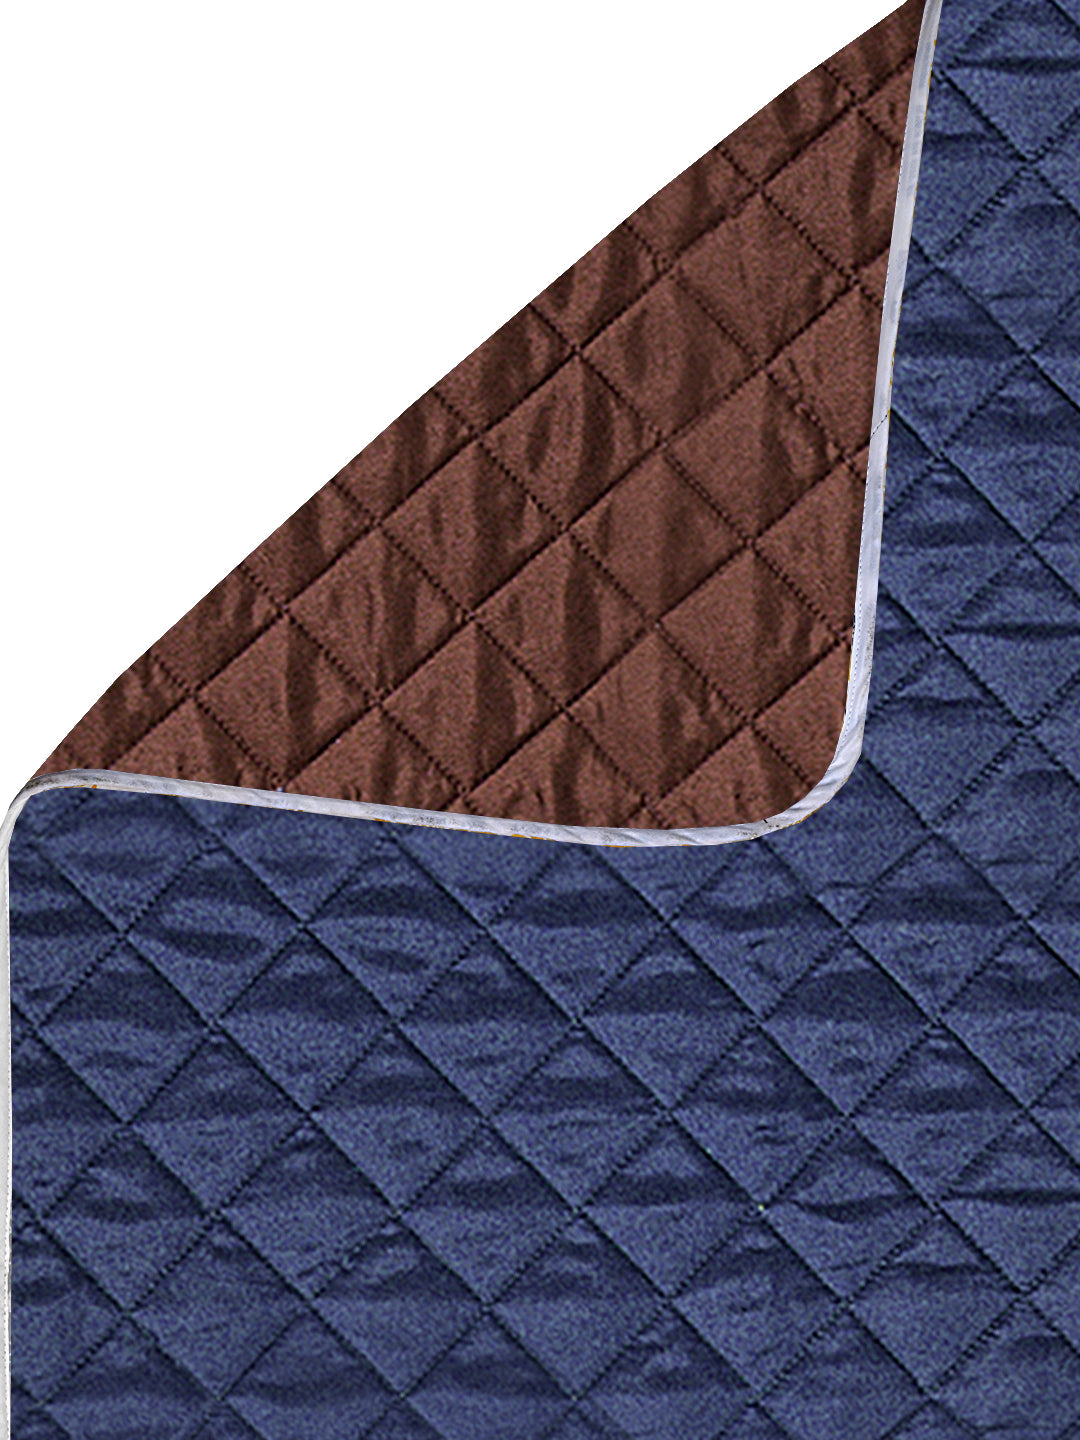 Reversible Quilted Polyester Solid Sofa Cover 1 Seater- Navy Blue & Brown